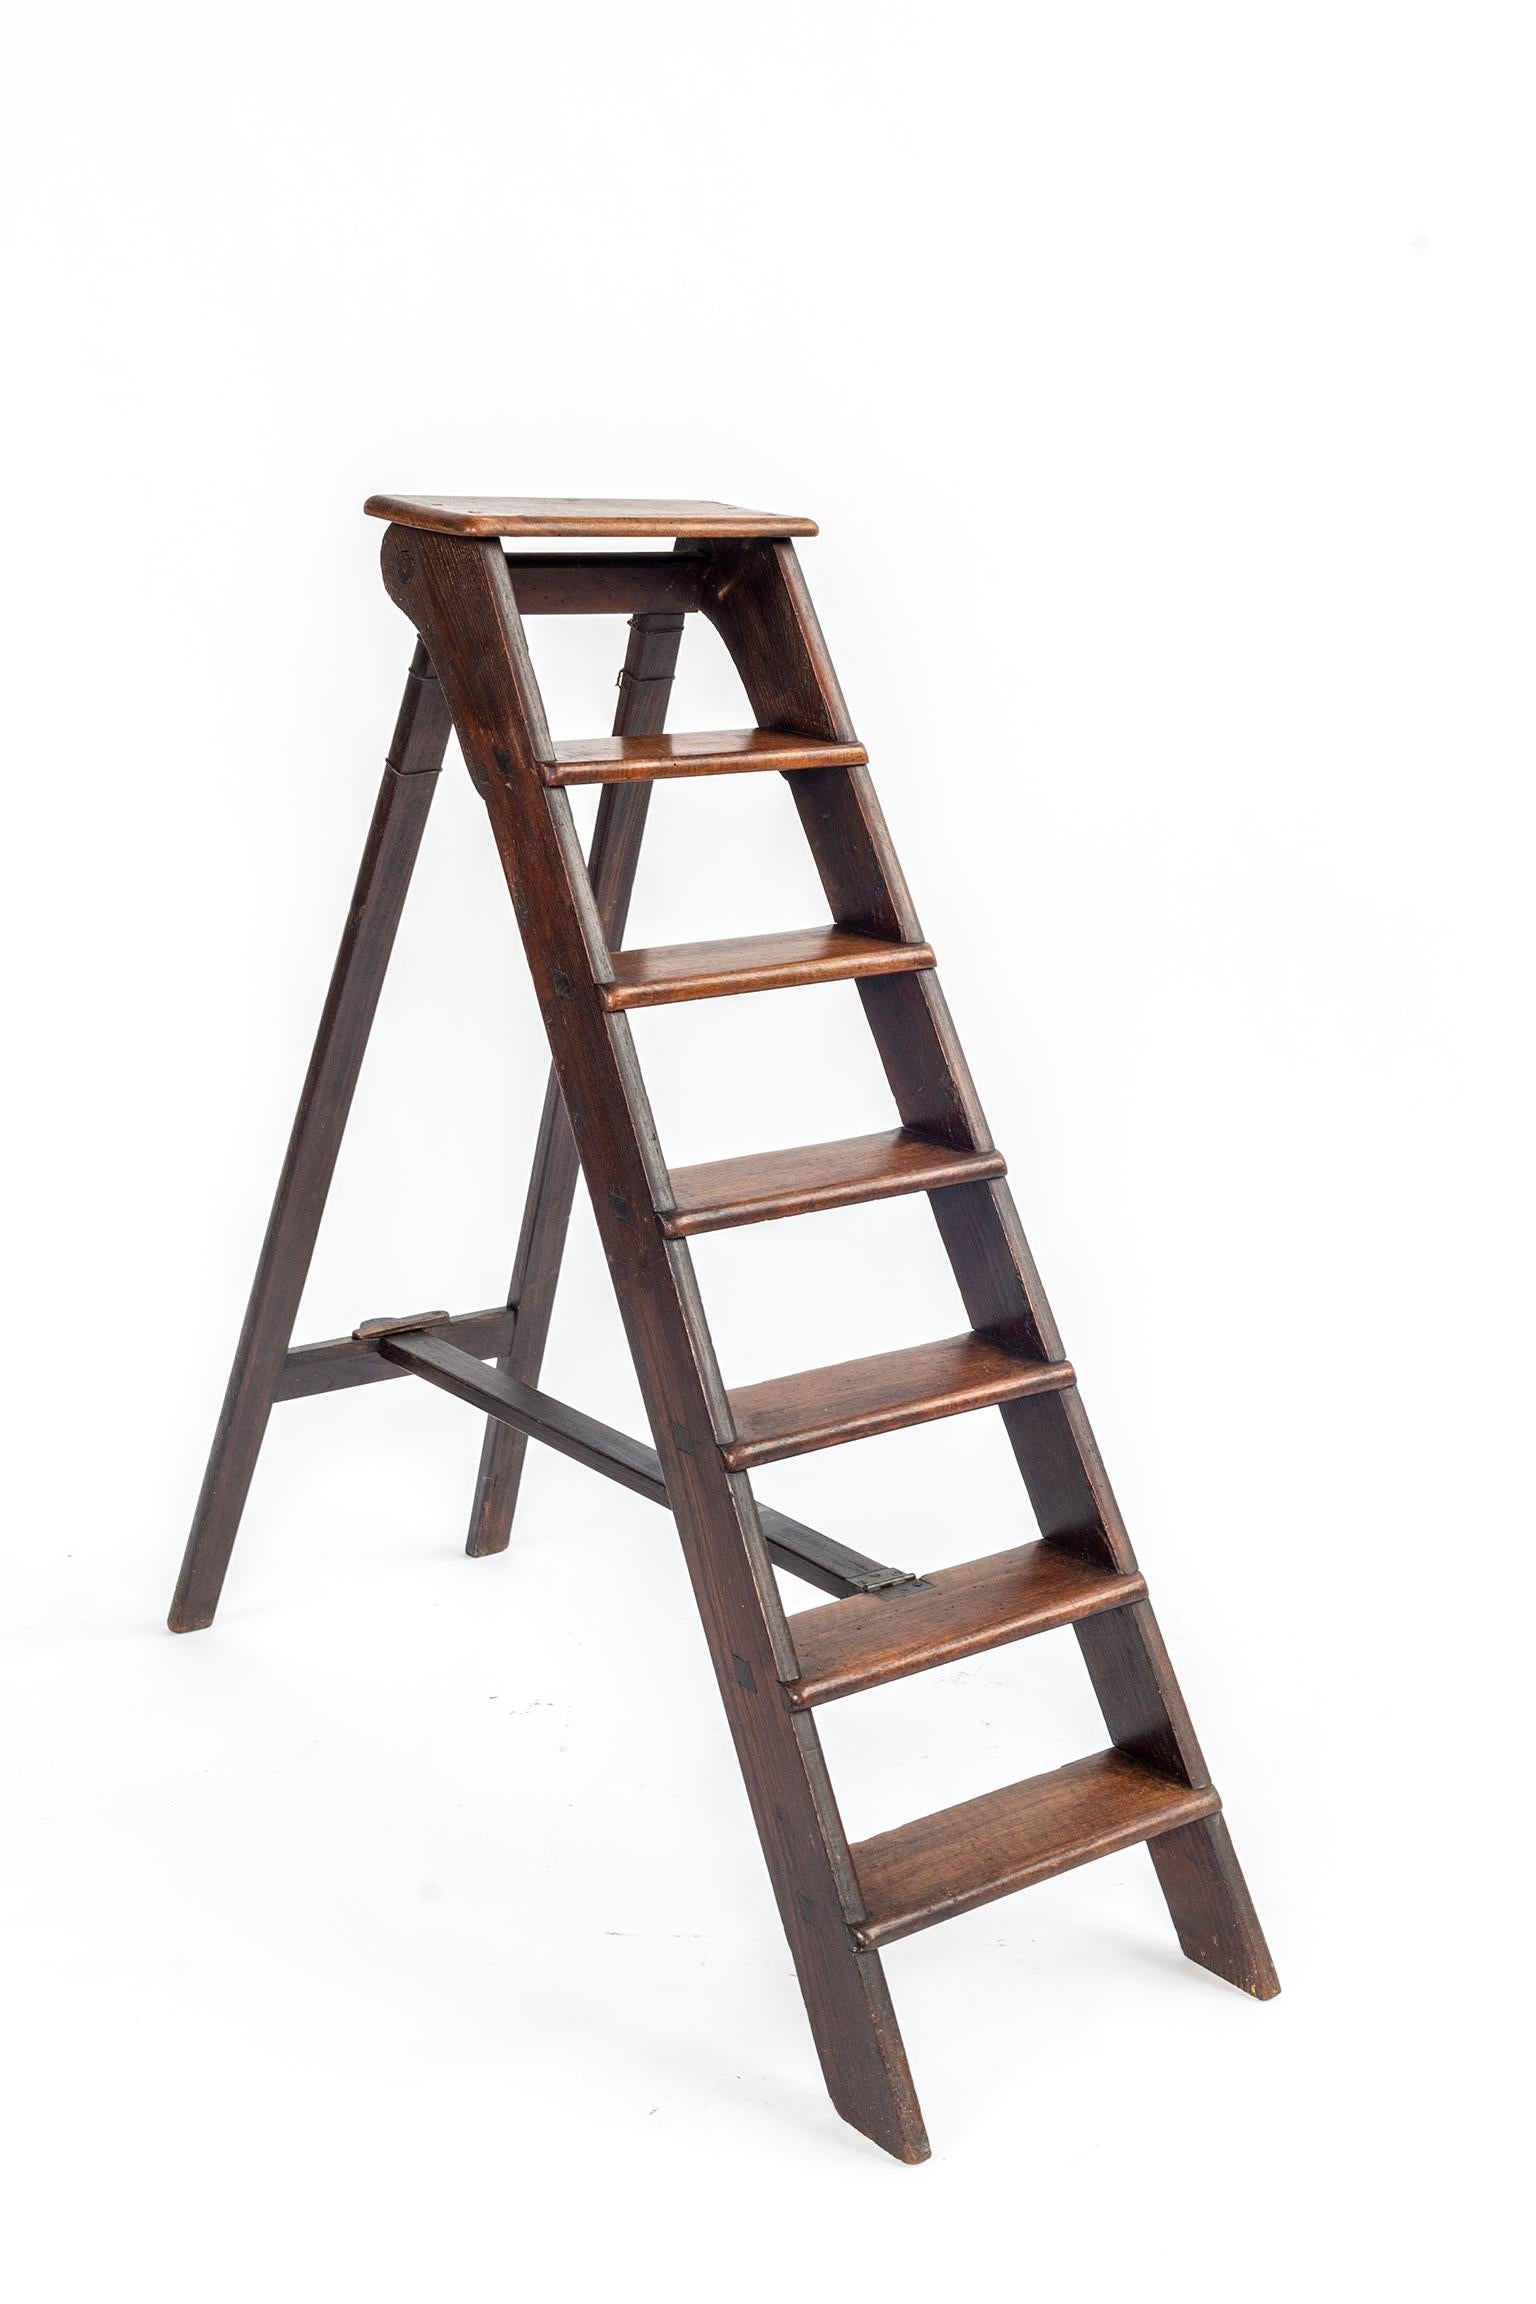 A walnut and chestnut library step ladder. Dimensions below are for the step ladder in open position.
The closed height is 53